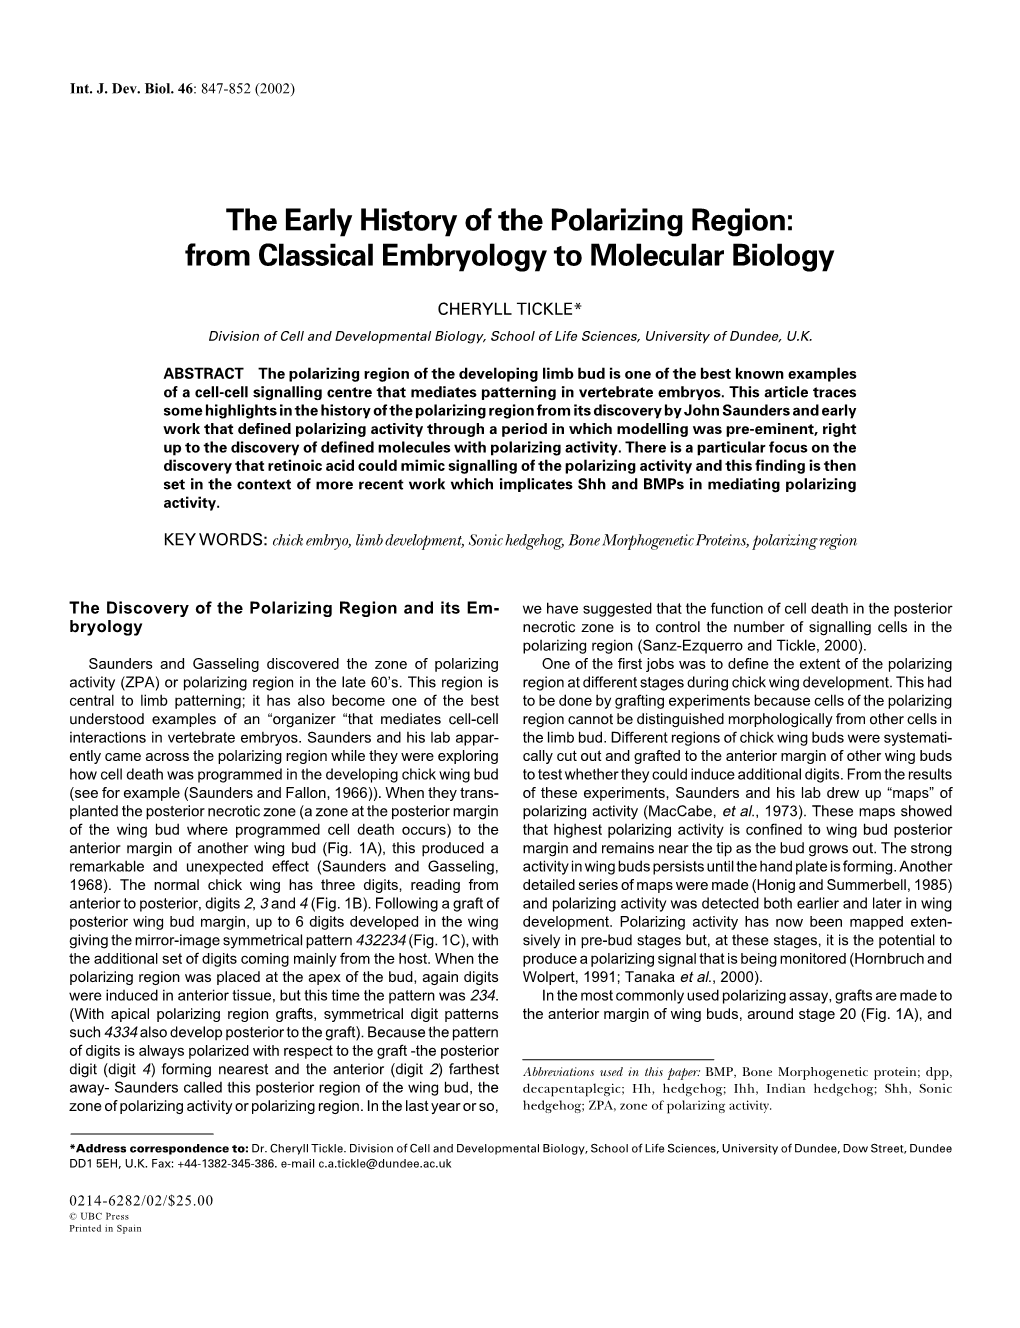 The Early History of the Polarizing Region: from Classical Embryology to Molecular Biology